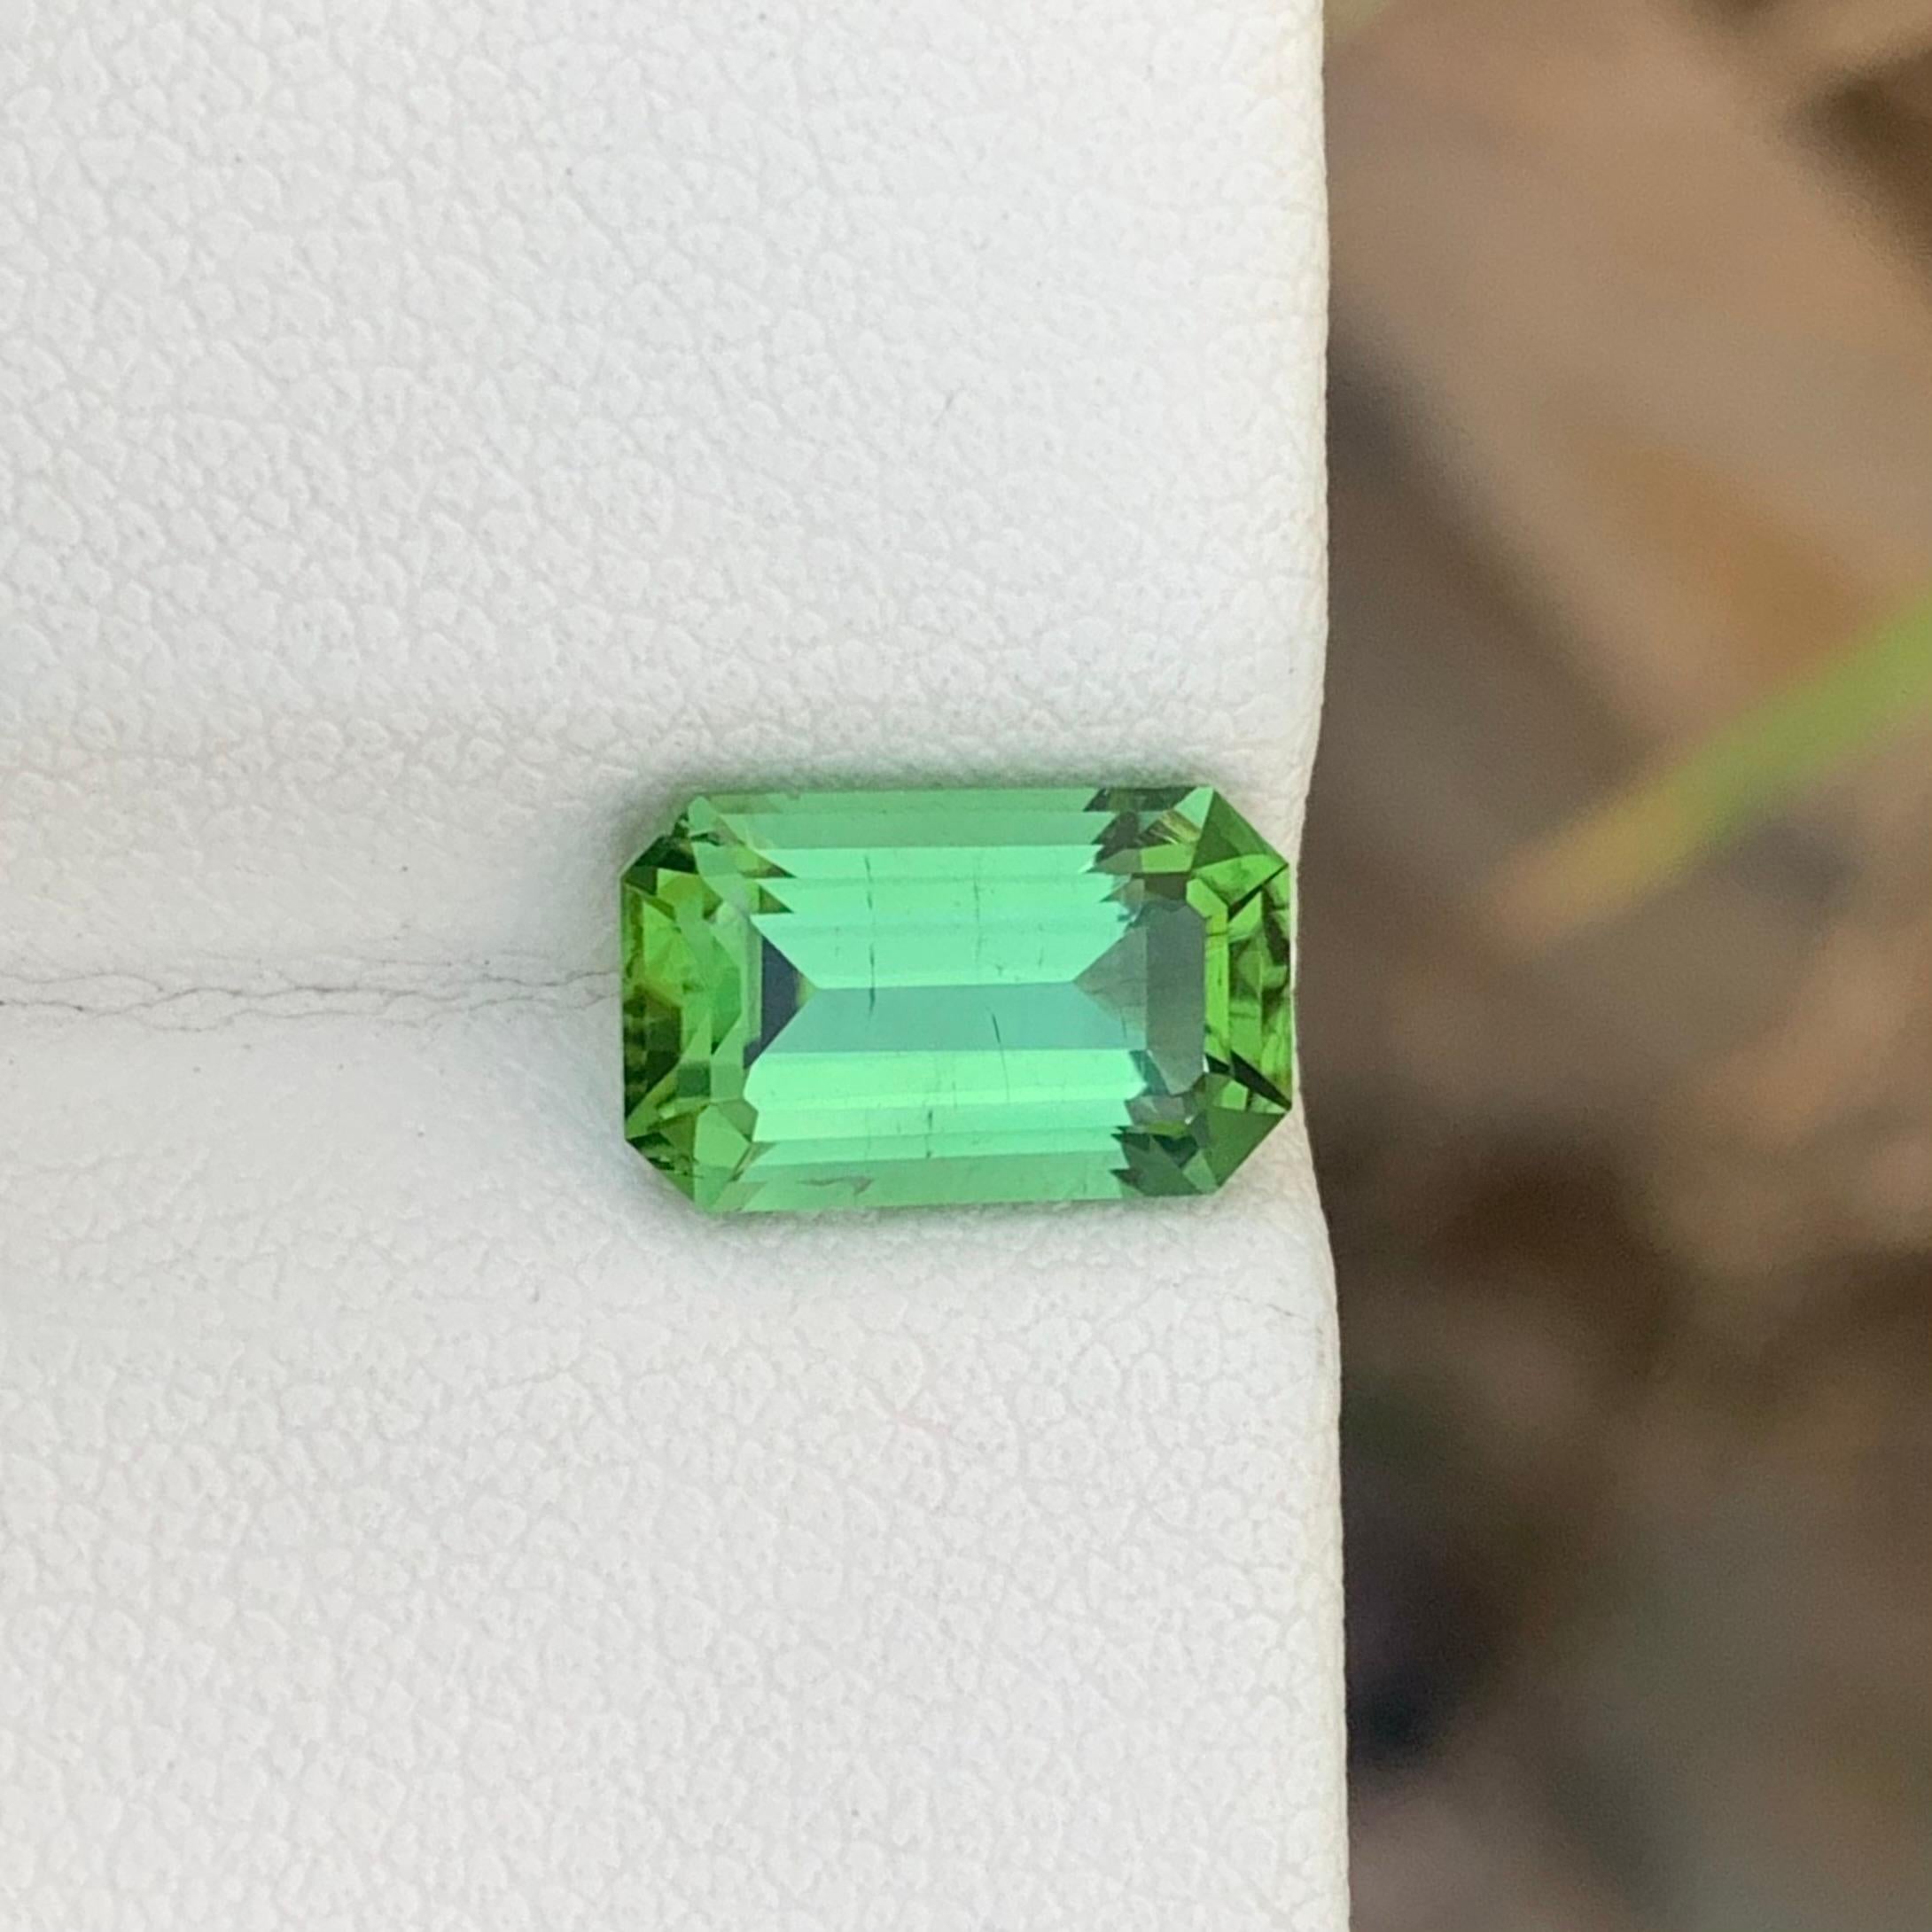 Loose Tourmaline 
Weight: 2.60 Carats 
Dimension: 10.1x6.3x5 Mm
Origin: Kunar Afghanistan 
Shape: Emerald 
Color: Green With Lagoon
Treatment: Non
Certificate: On Client Demand
Tourmaline is a fascinating mineral with a complex and diverse